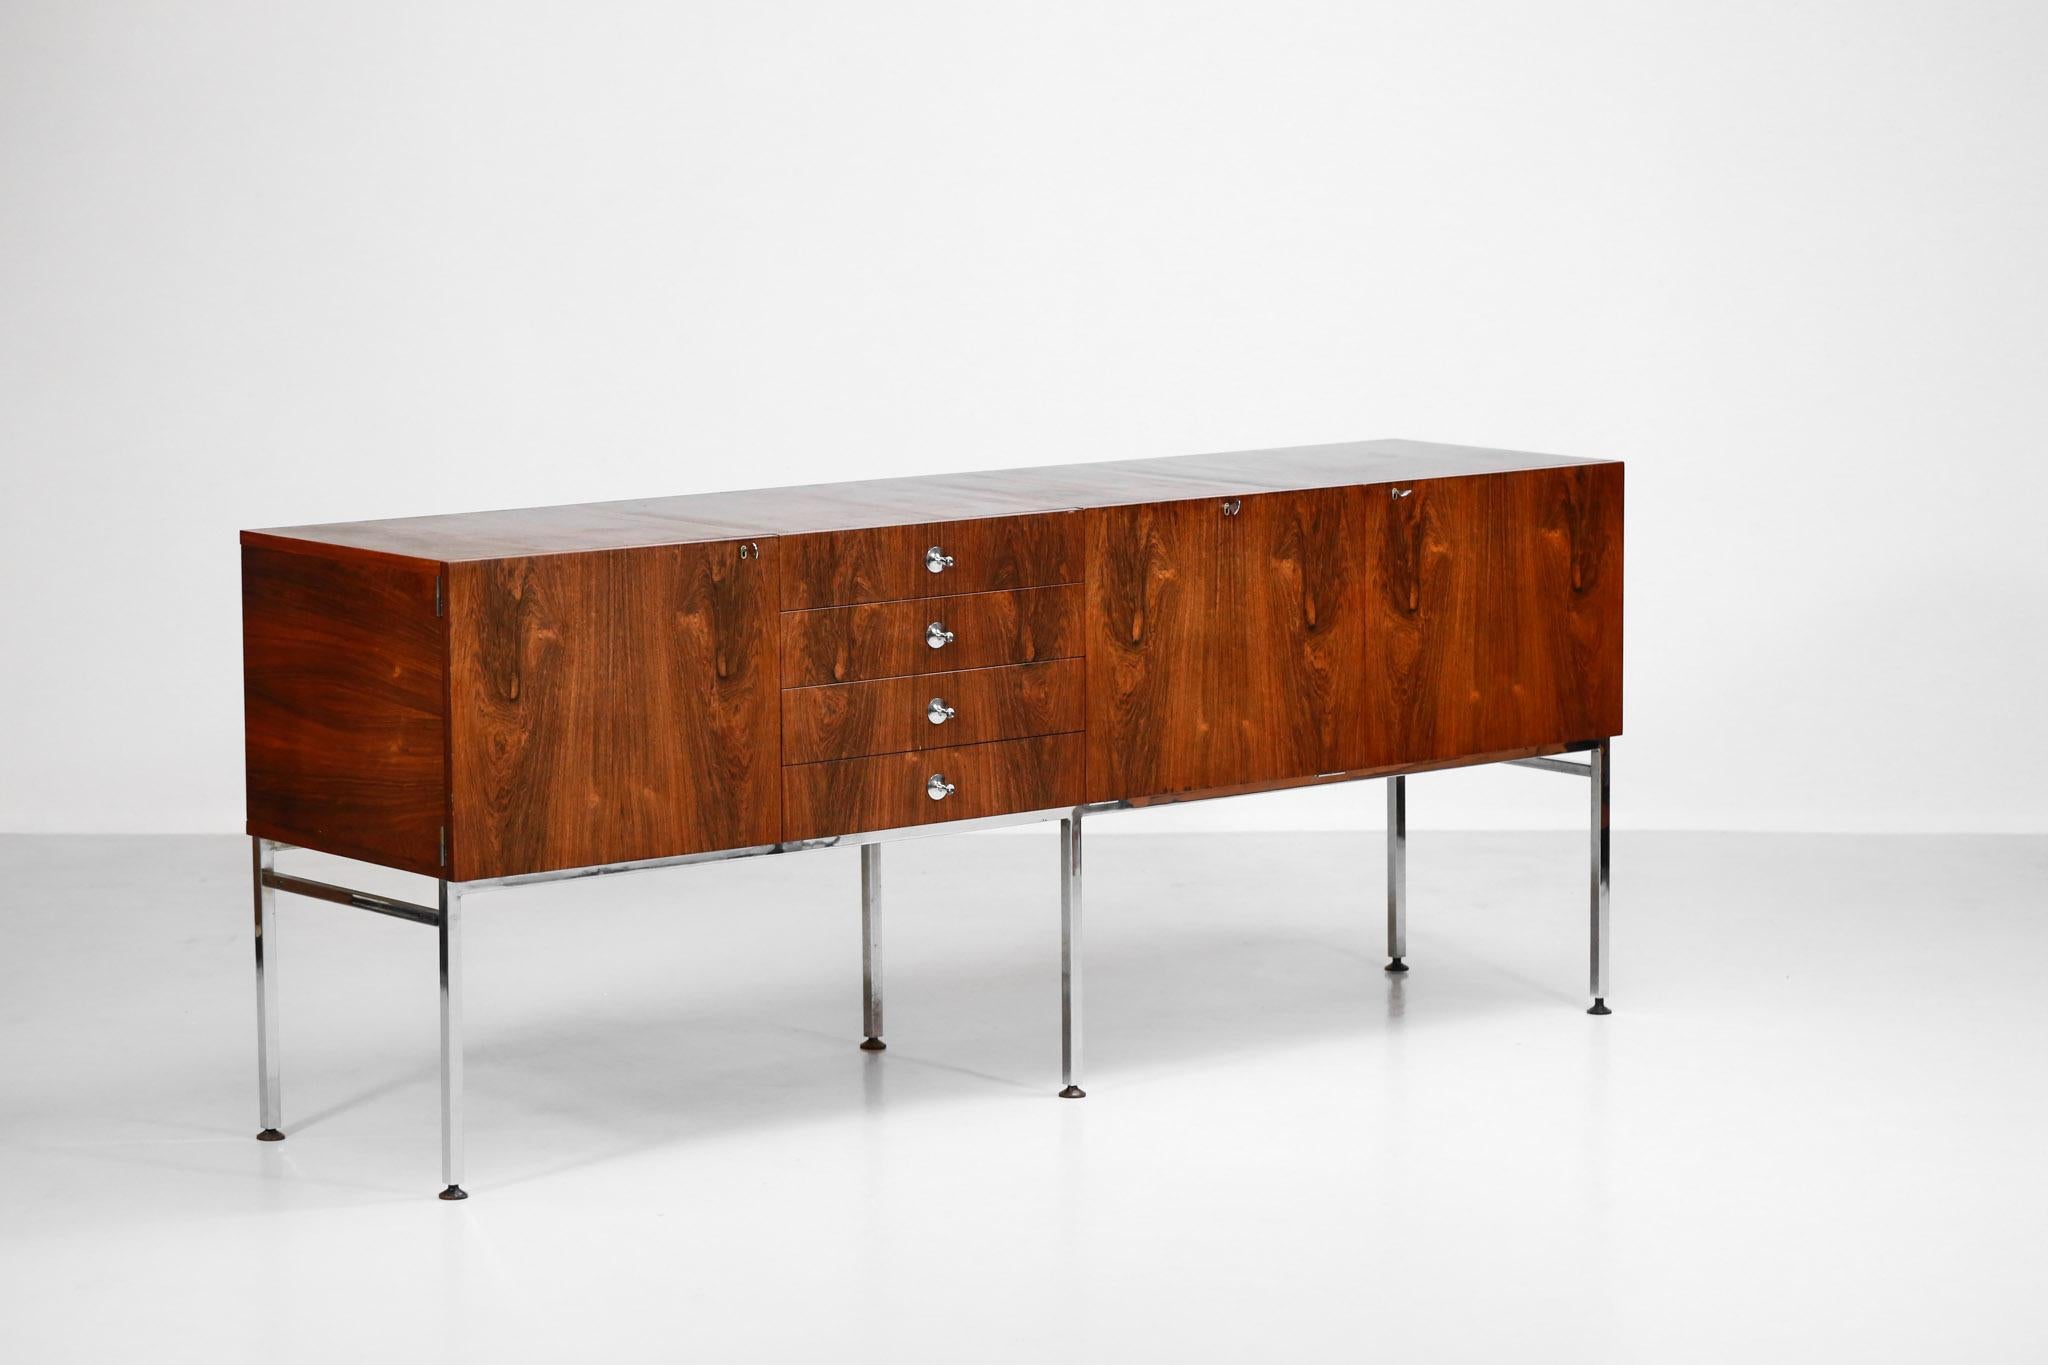 Wood Great Alain Richard Large Sideboard of 1960s for Meuble TV French Design 1960 For Sale